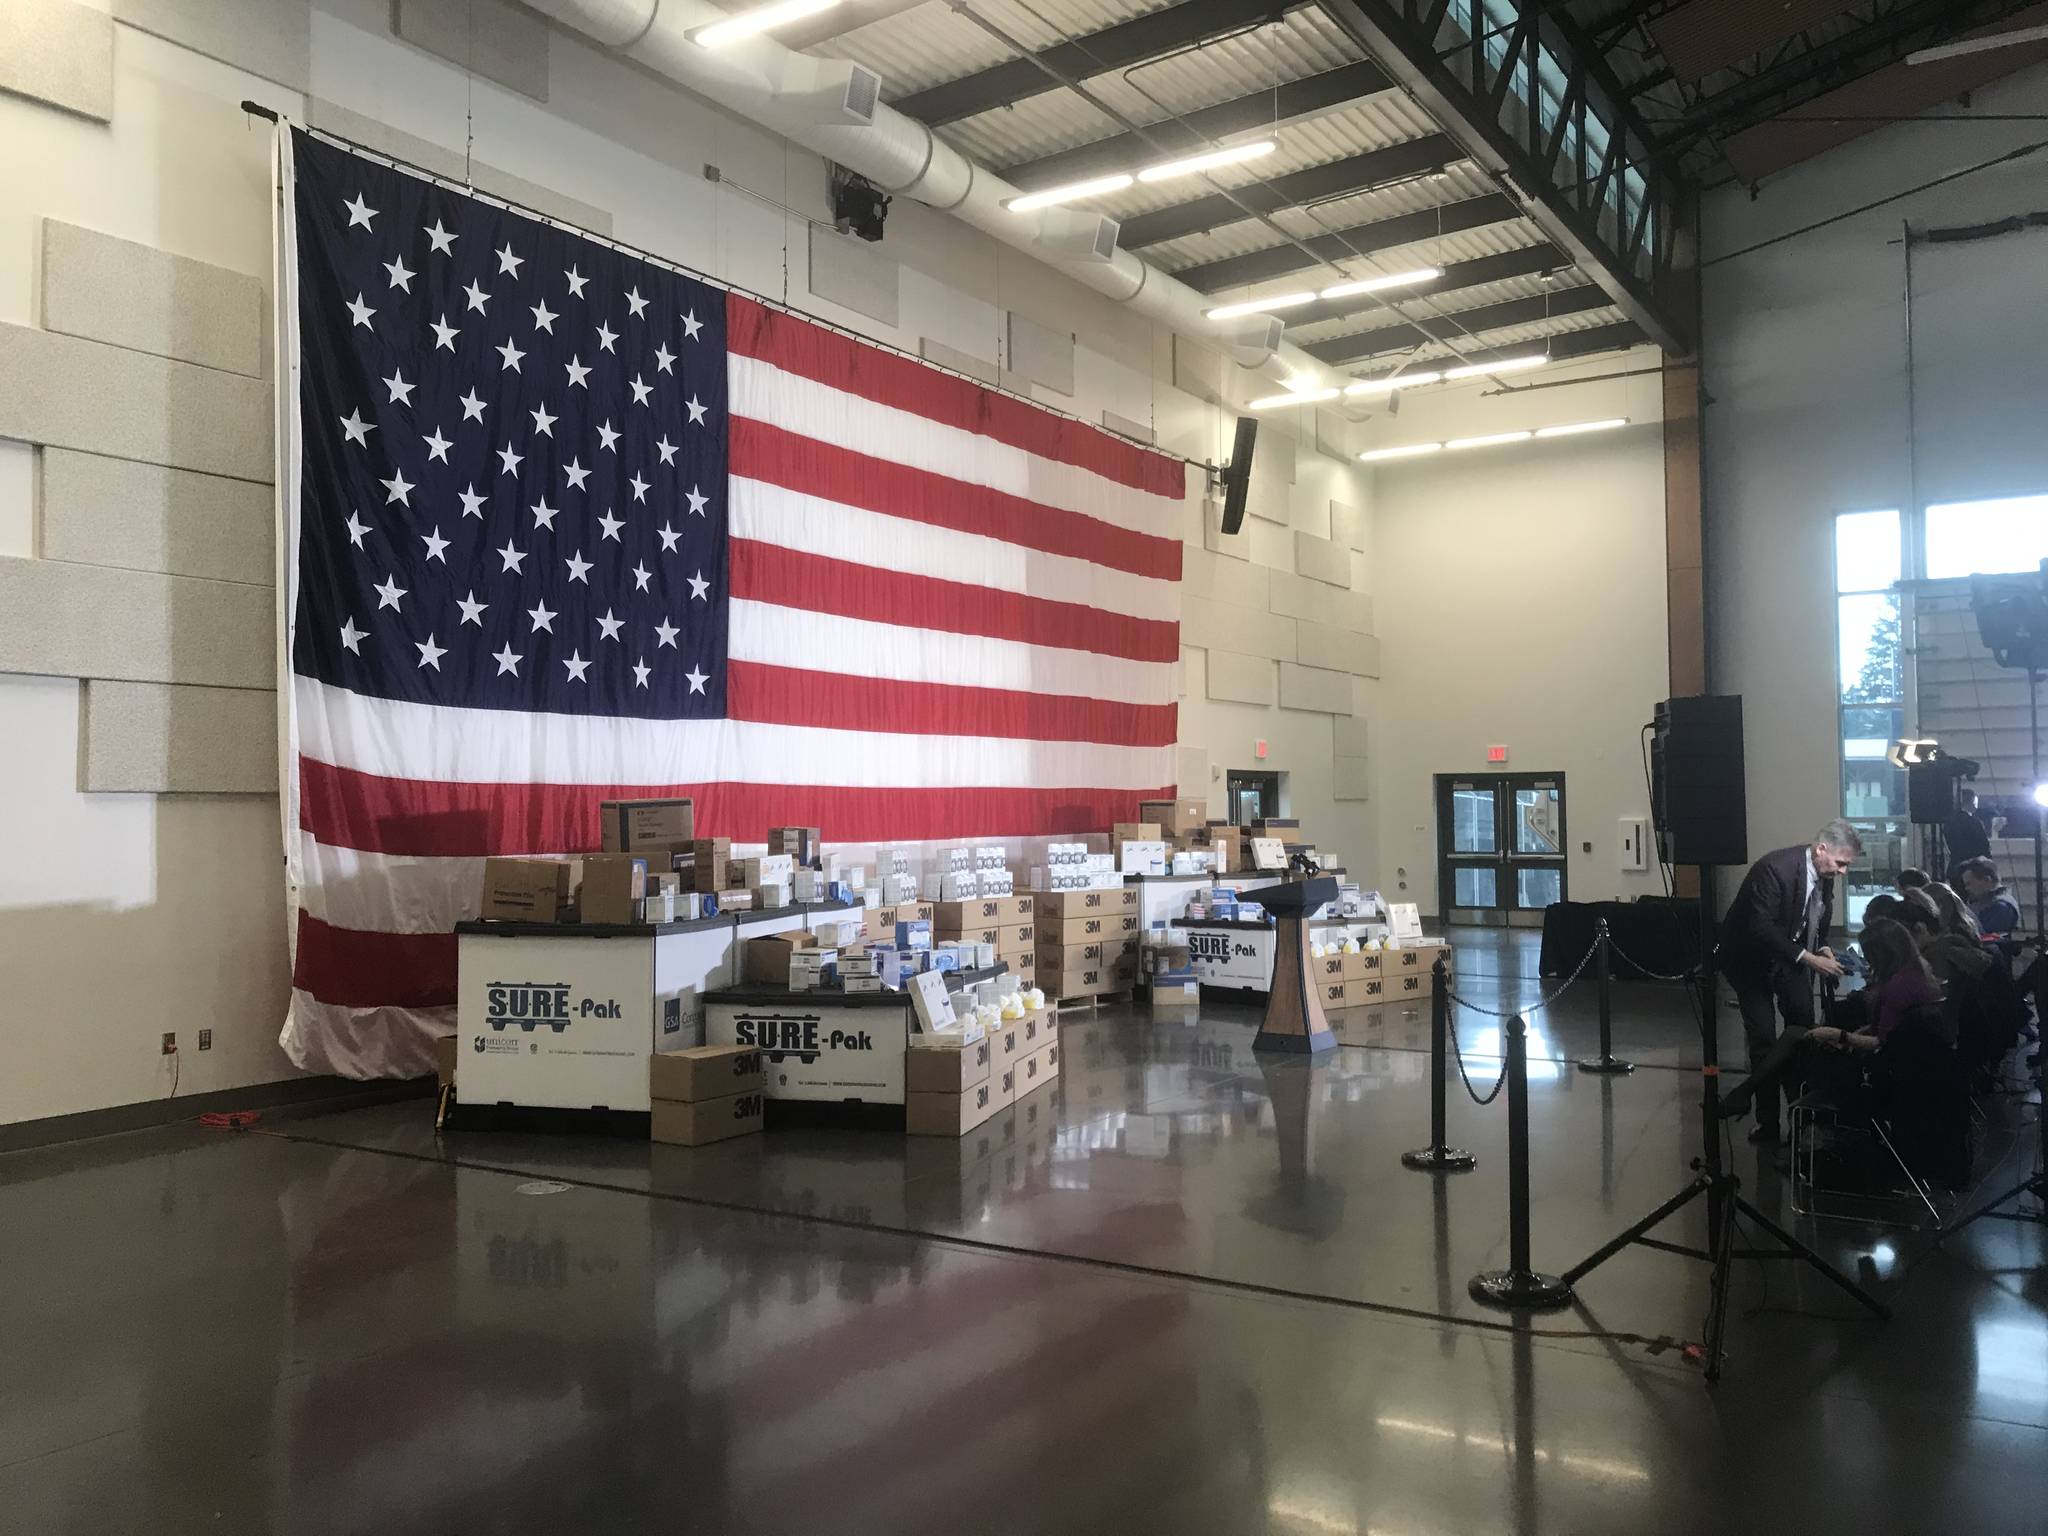 On display Thursday, March 5, at Camp Murray in Pierce County are some of the medical supplies brought to Washington by federal health officials, including face masks, respirators, gowns and other supplies. Photo by Cameron Sheppard/WNPA News Bureau